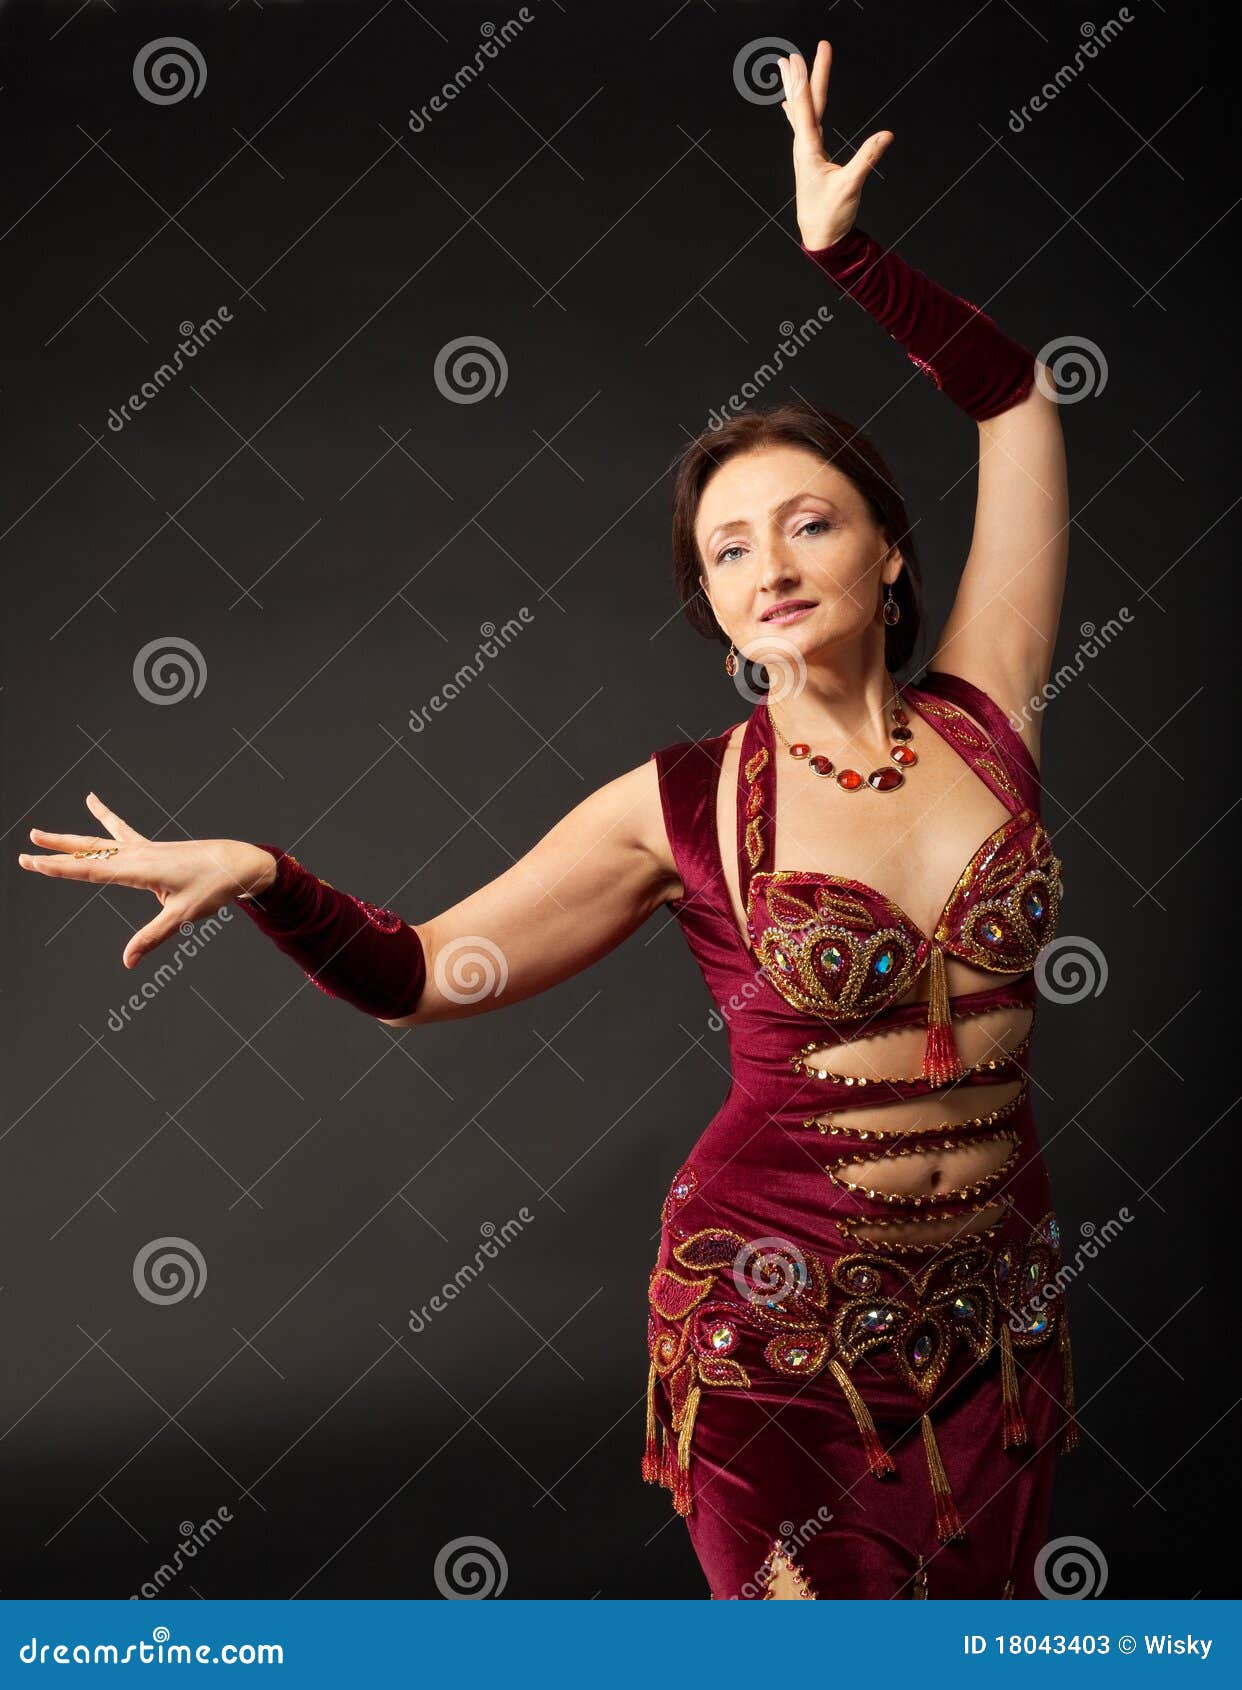 Mature Woman Dance in Arabic Costume Stock Image - Image of belly, girls:  18043403